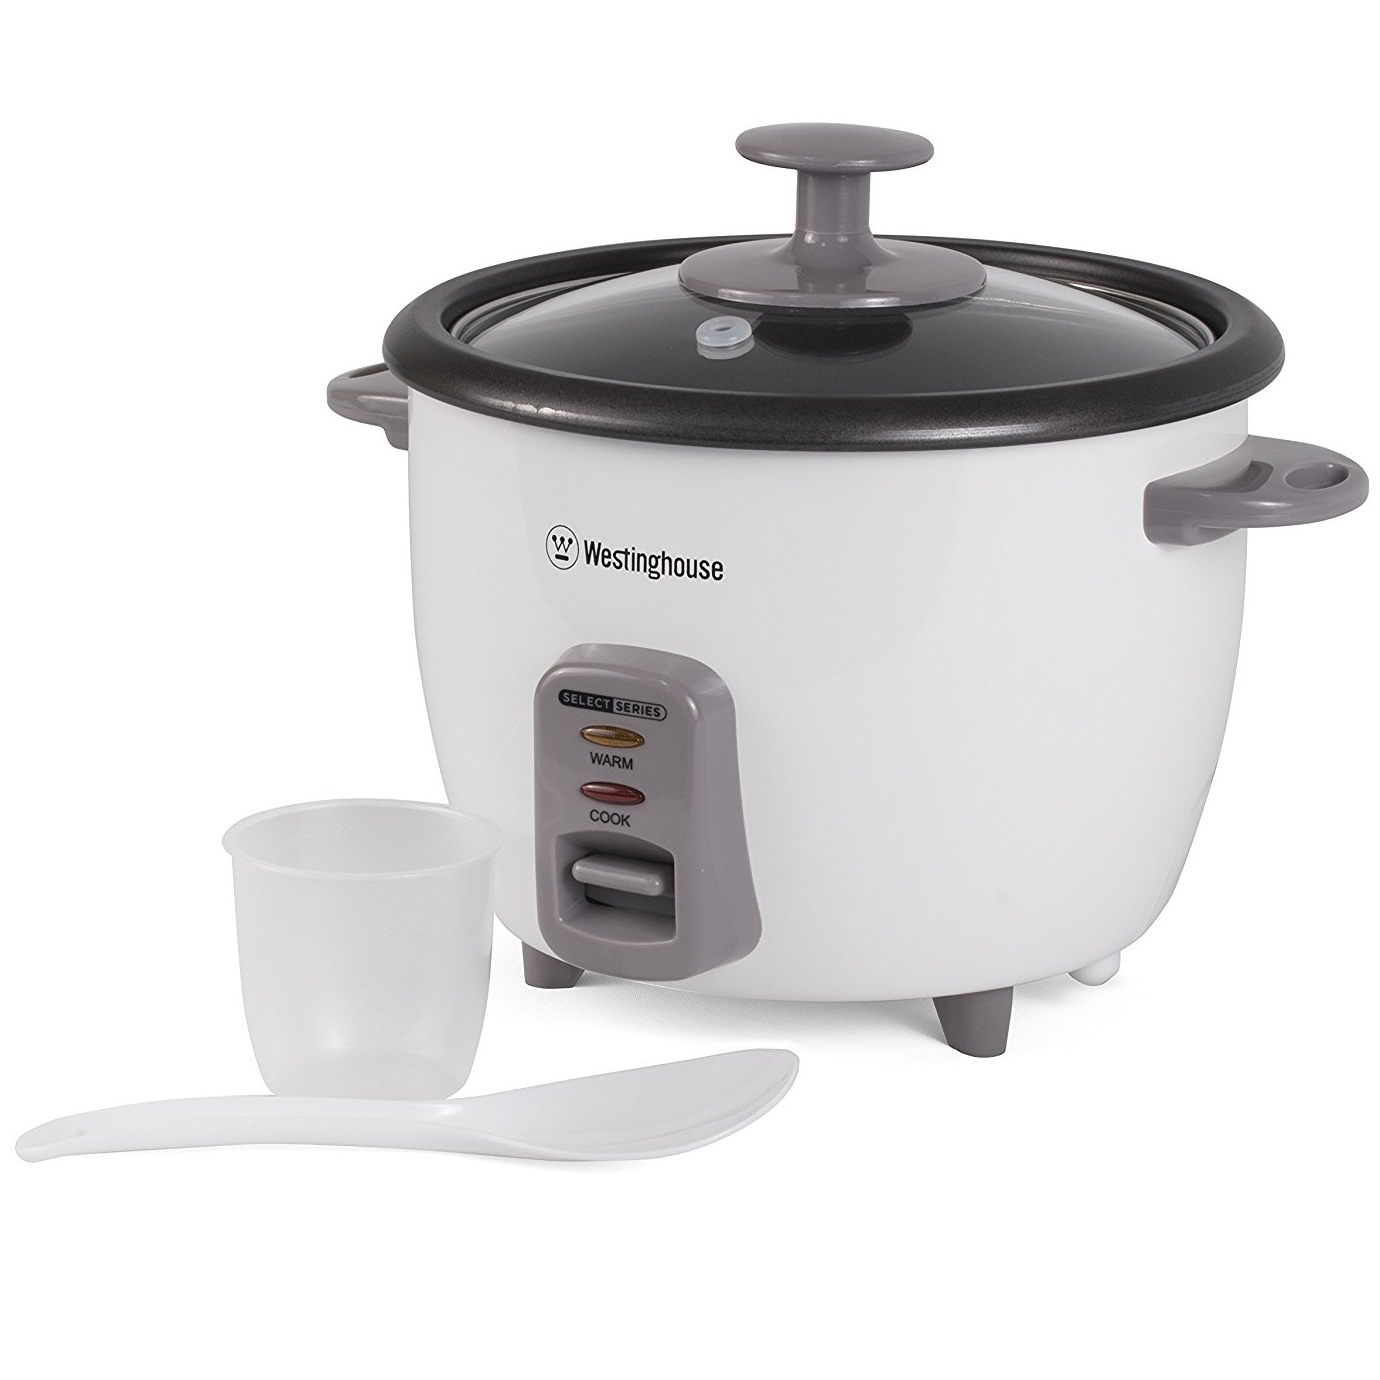 Westinghouse Select Series 10 Cup Rice Cooker – Only $8.91!